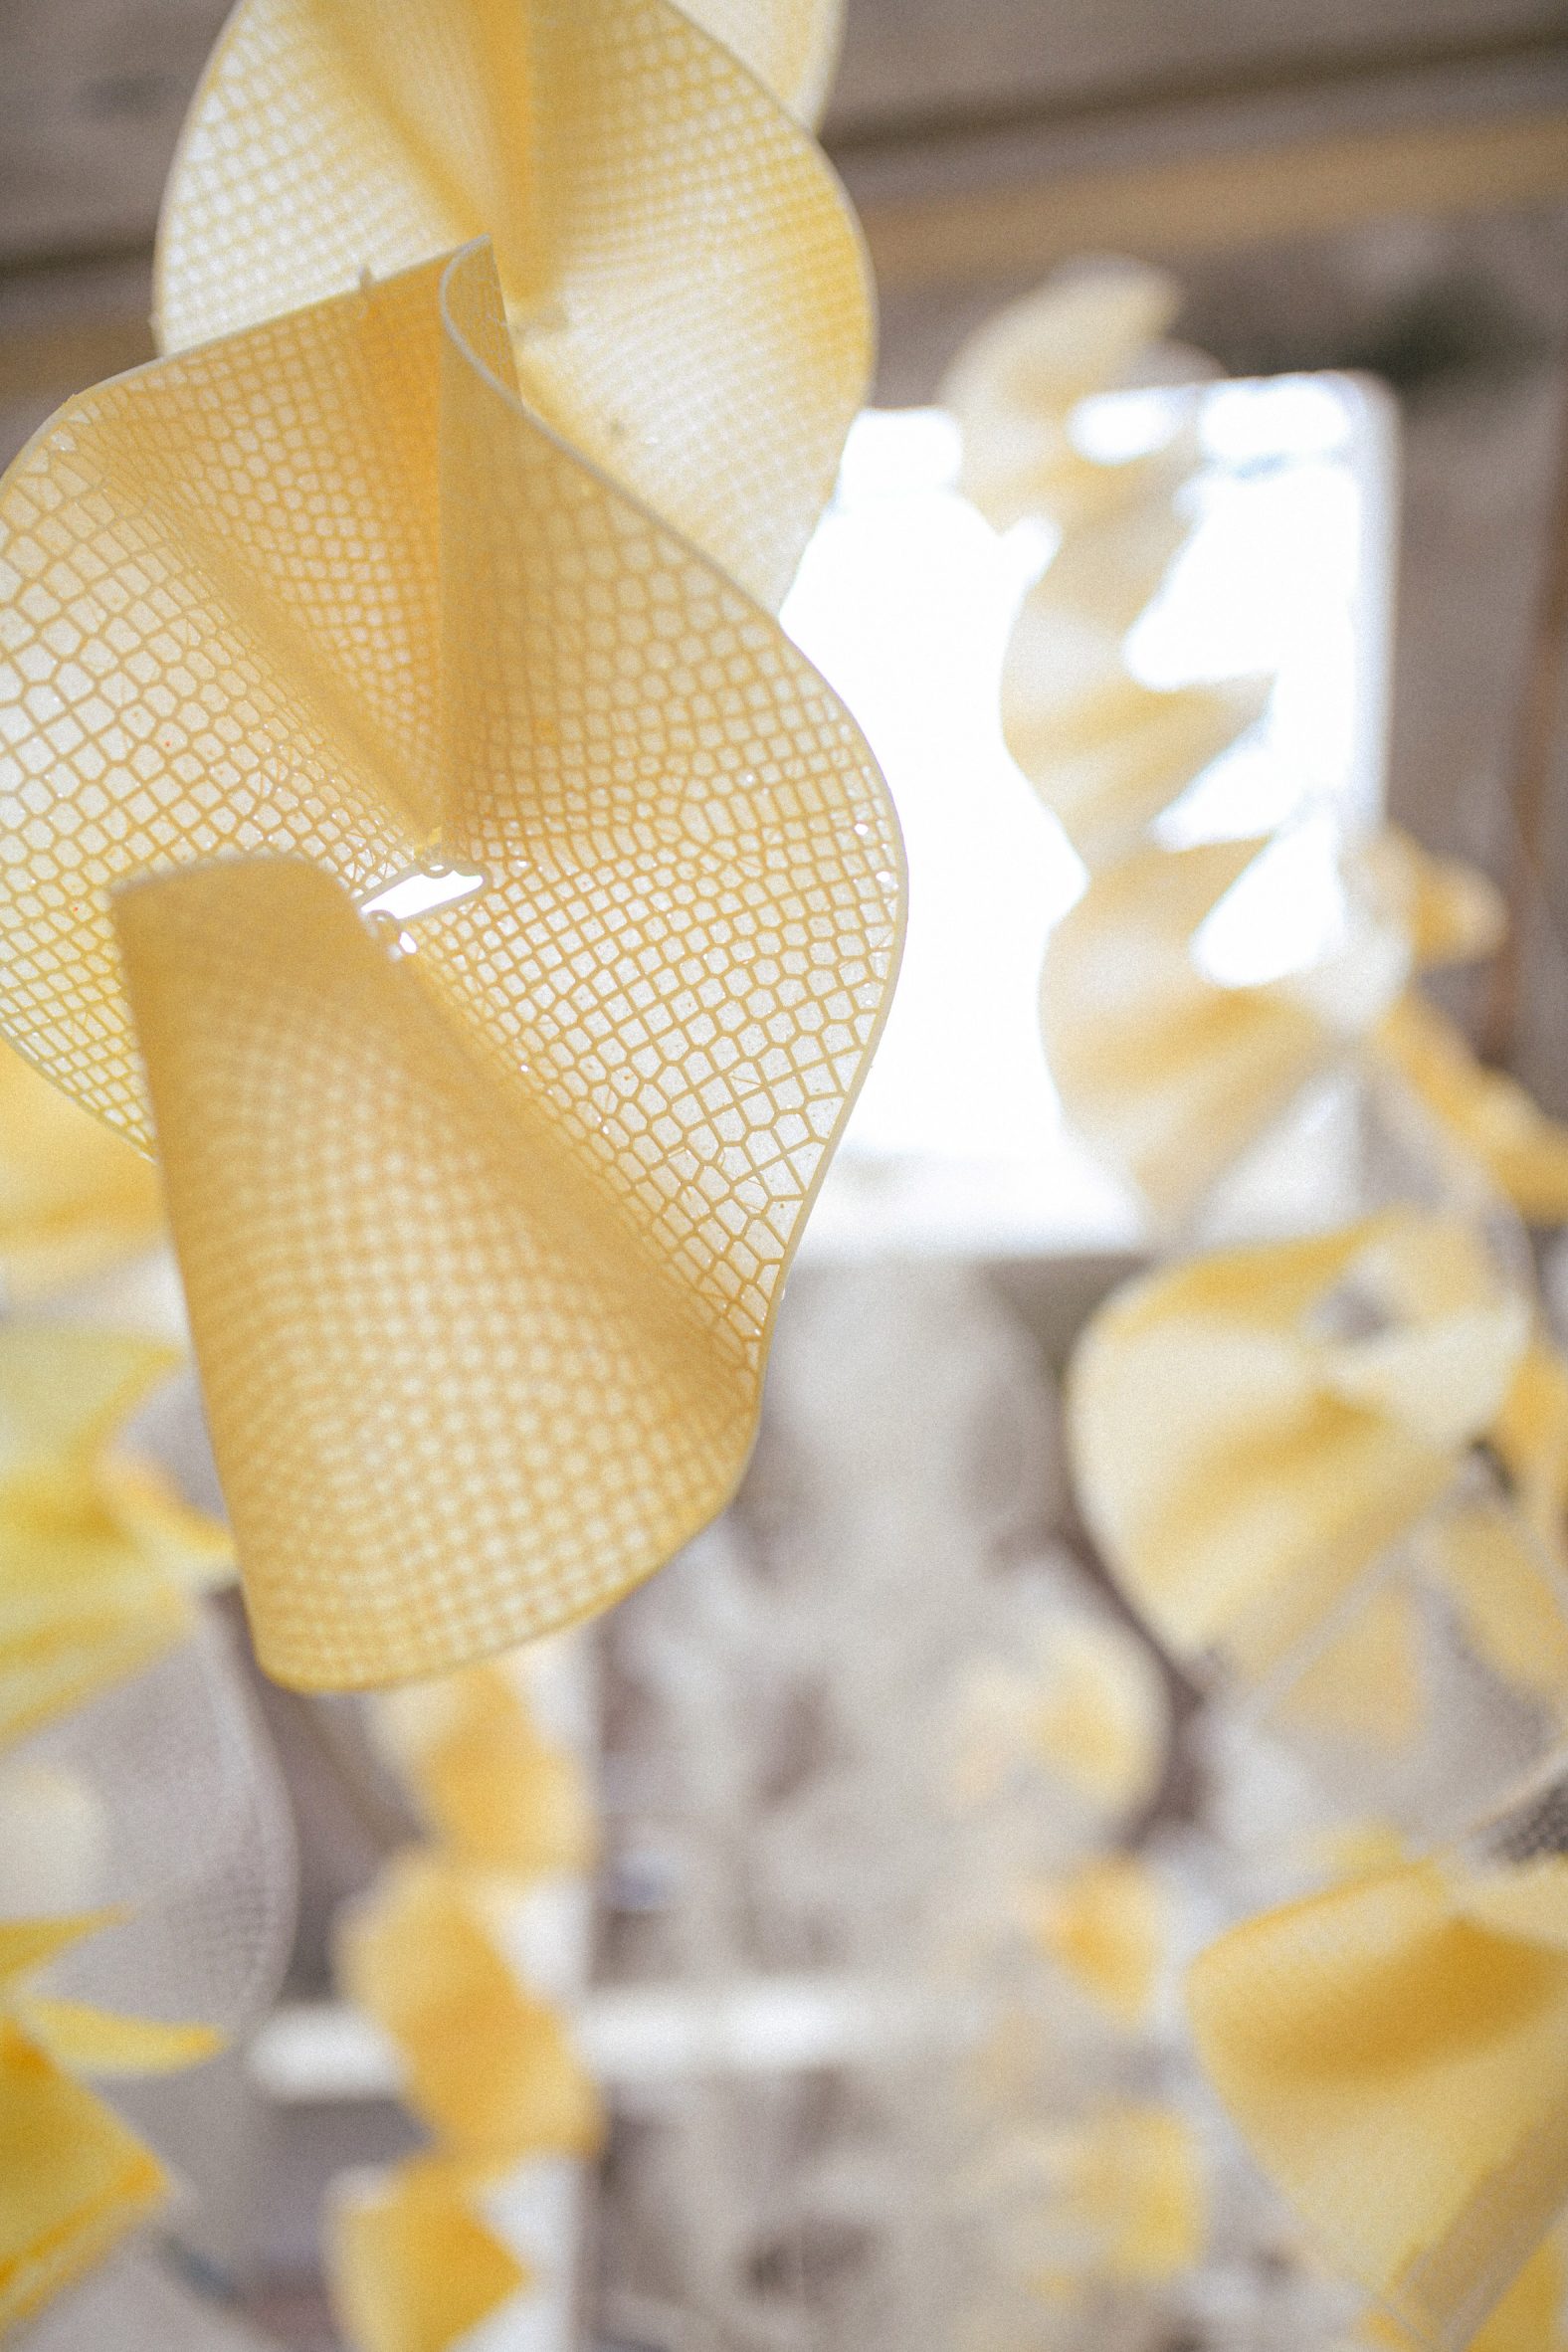 Close-up photo of the Sensbiom installation in its yellow state, showing the lattice structure that underlies the ribbons